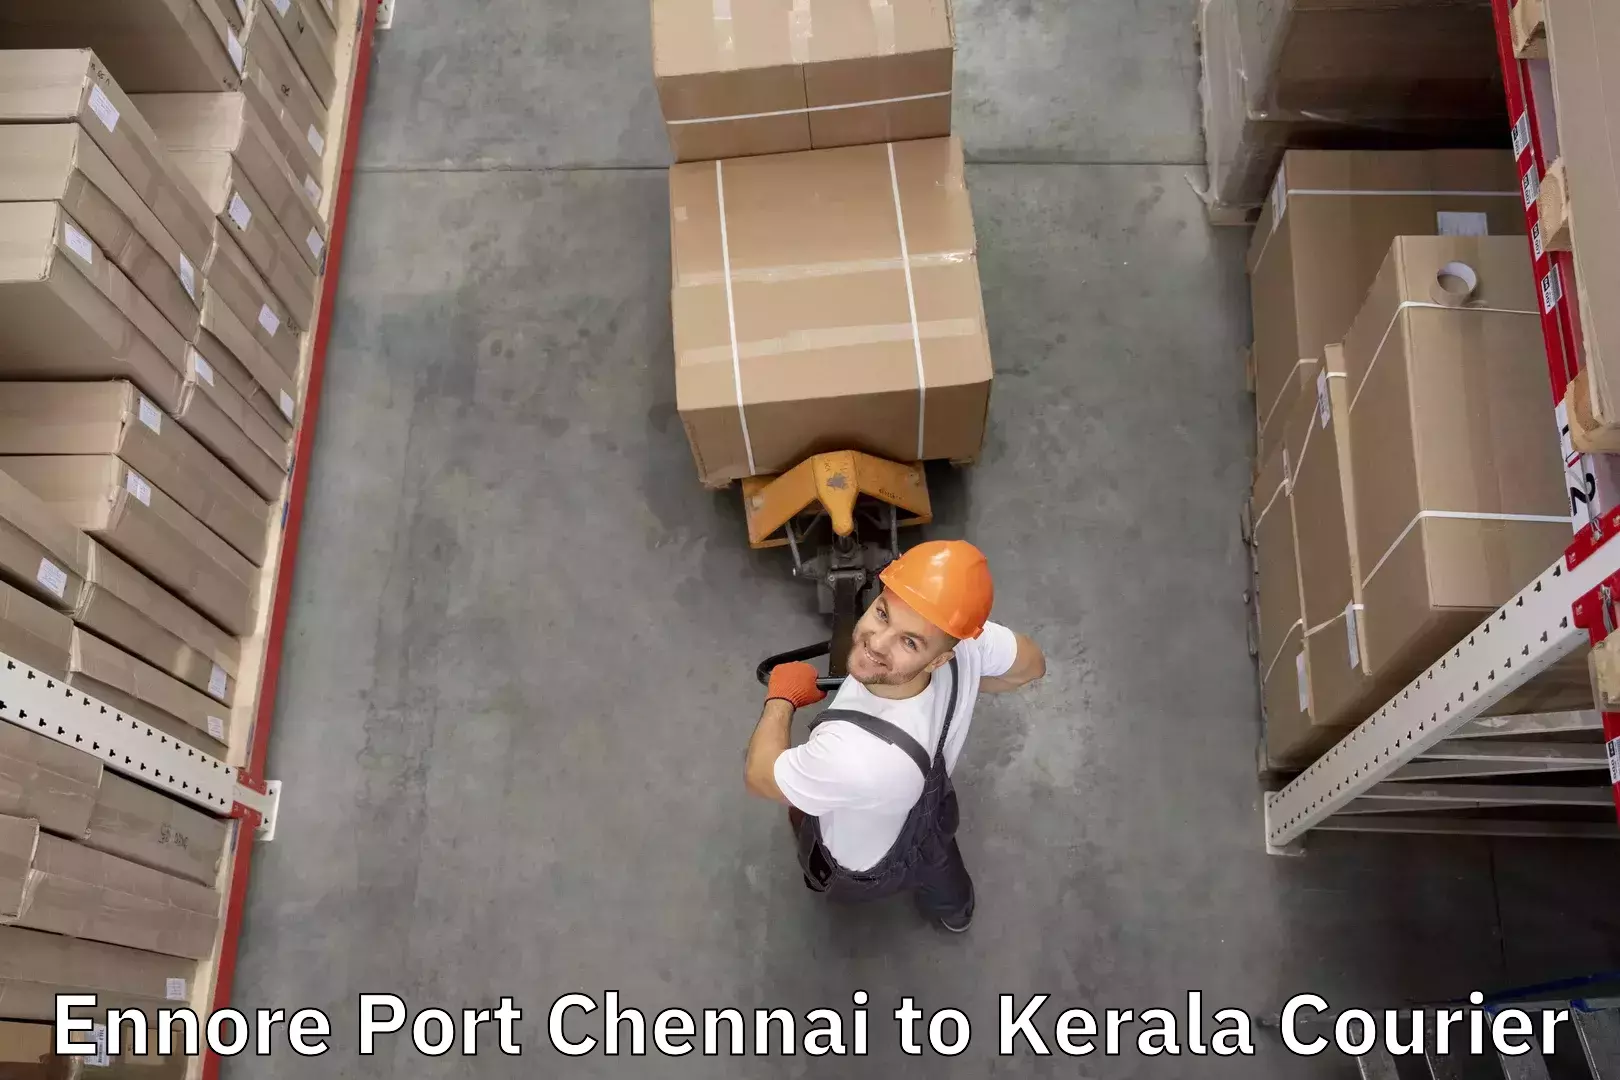 Hassle-free luggage shipping Ennore Port Chennai to Thrissur